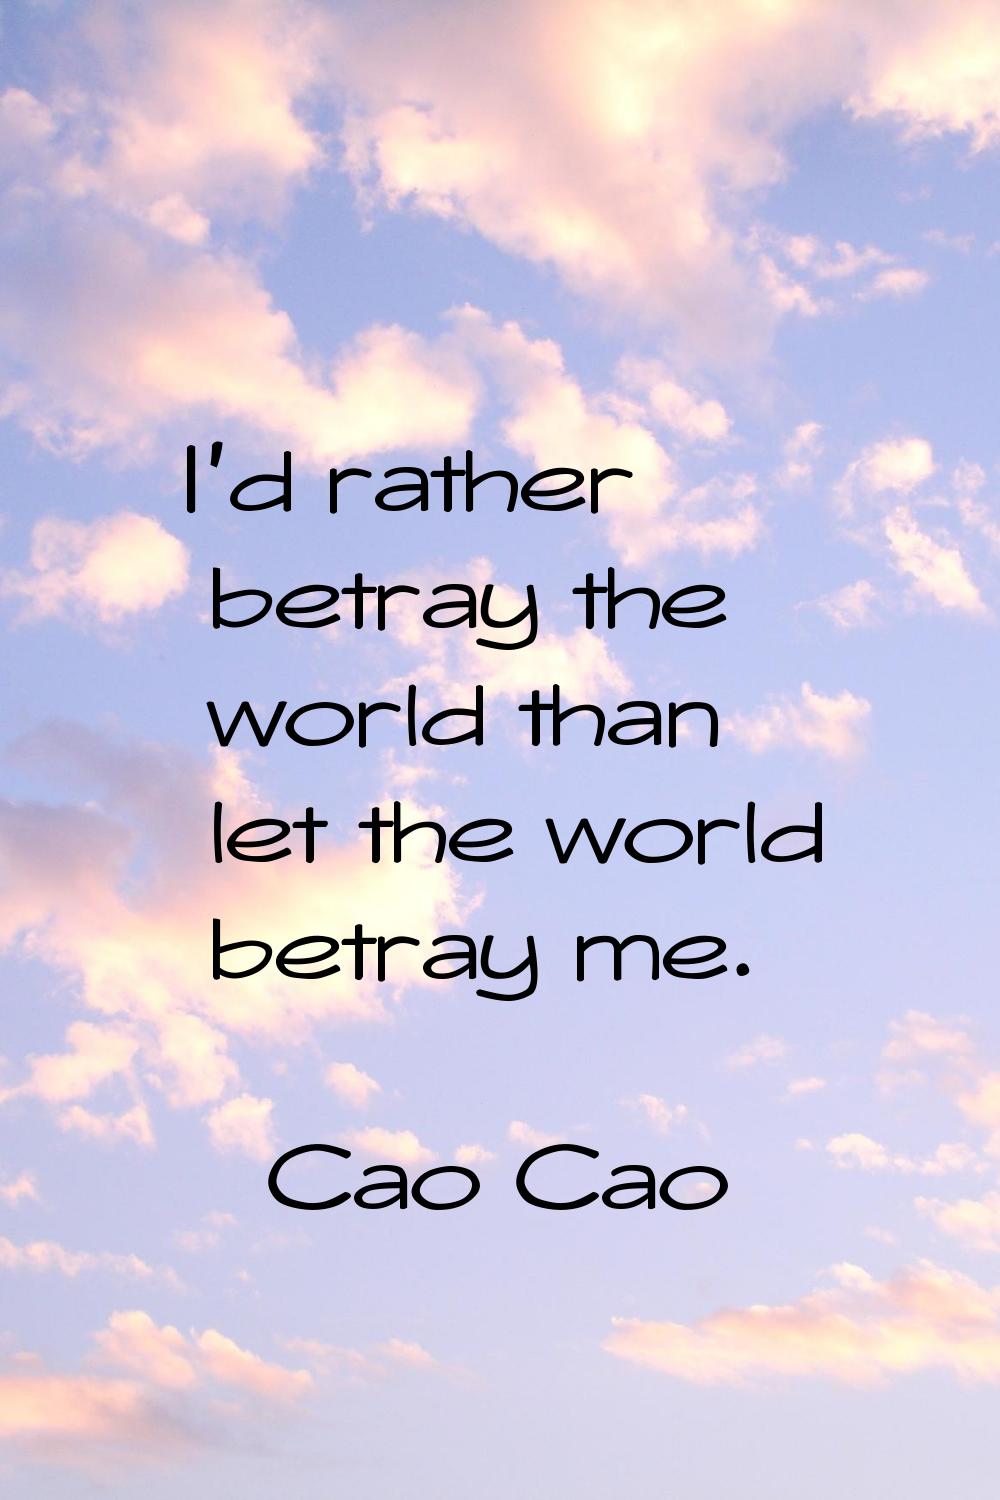 I'd rather betray the world than let the world betray me.